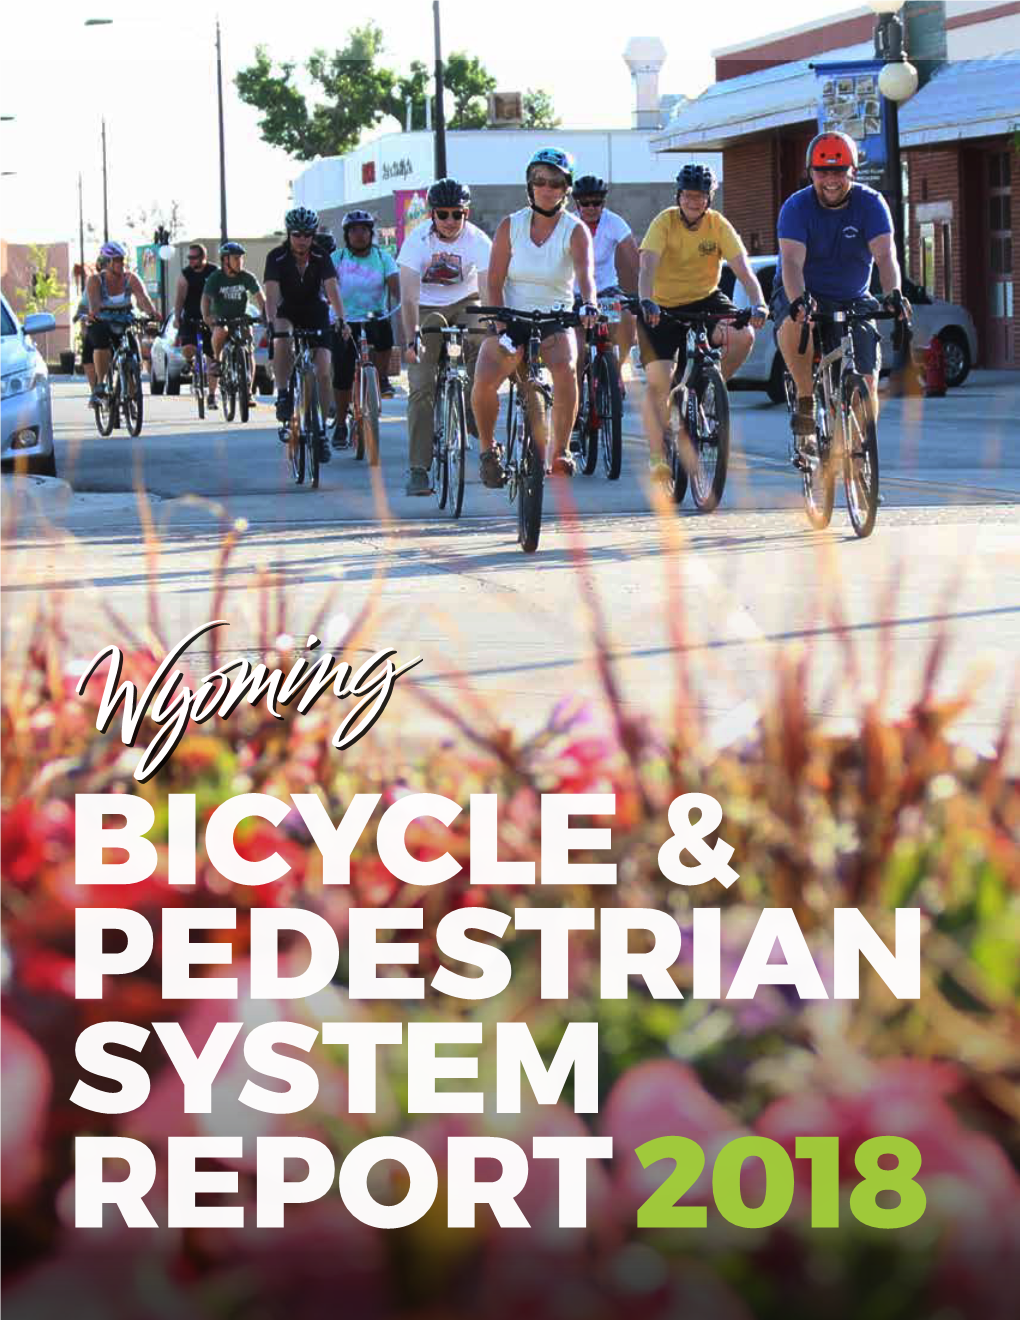 Wyoming Bicycle & Pedestrian System Report